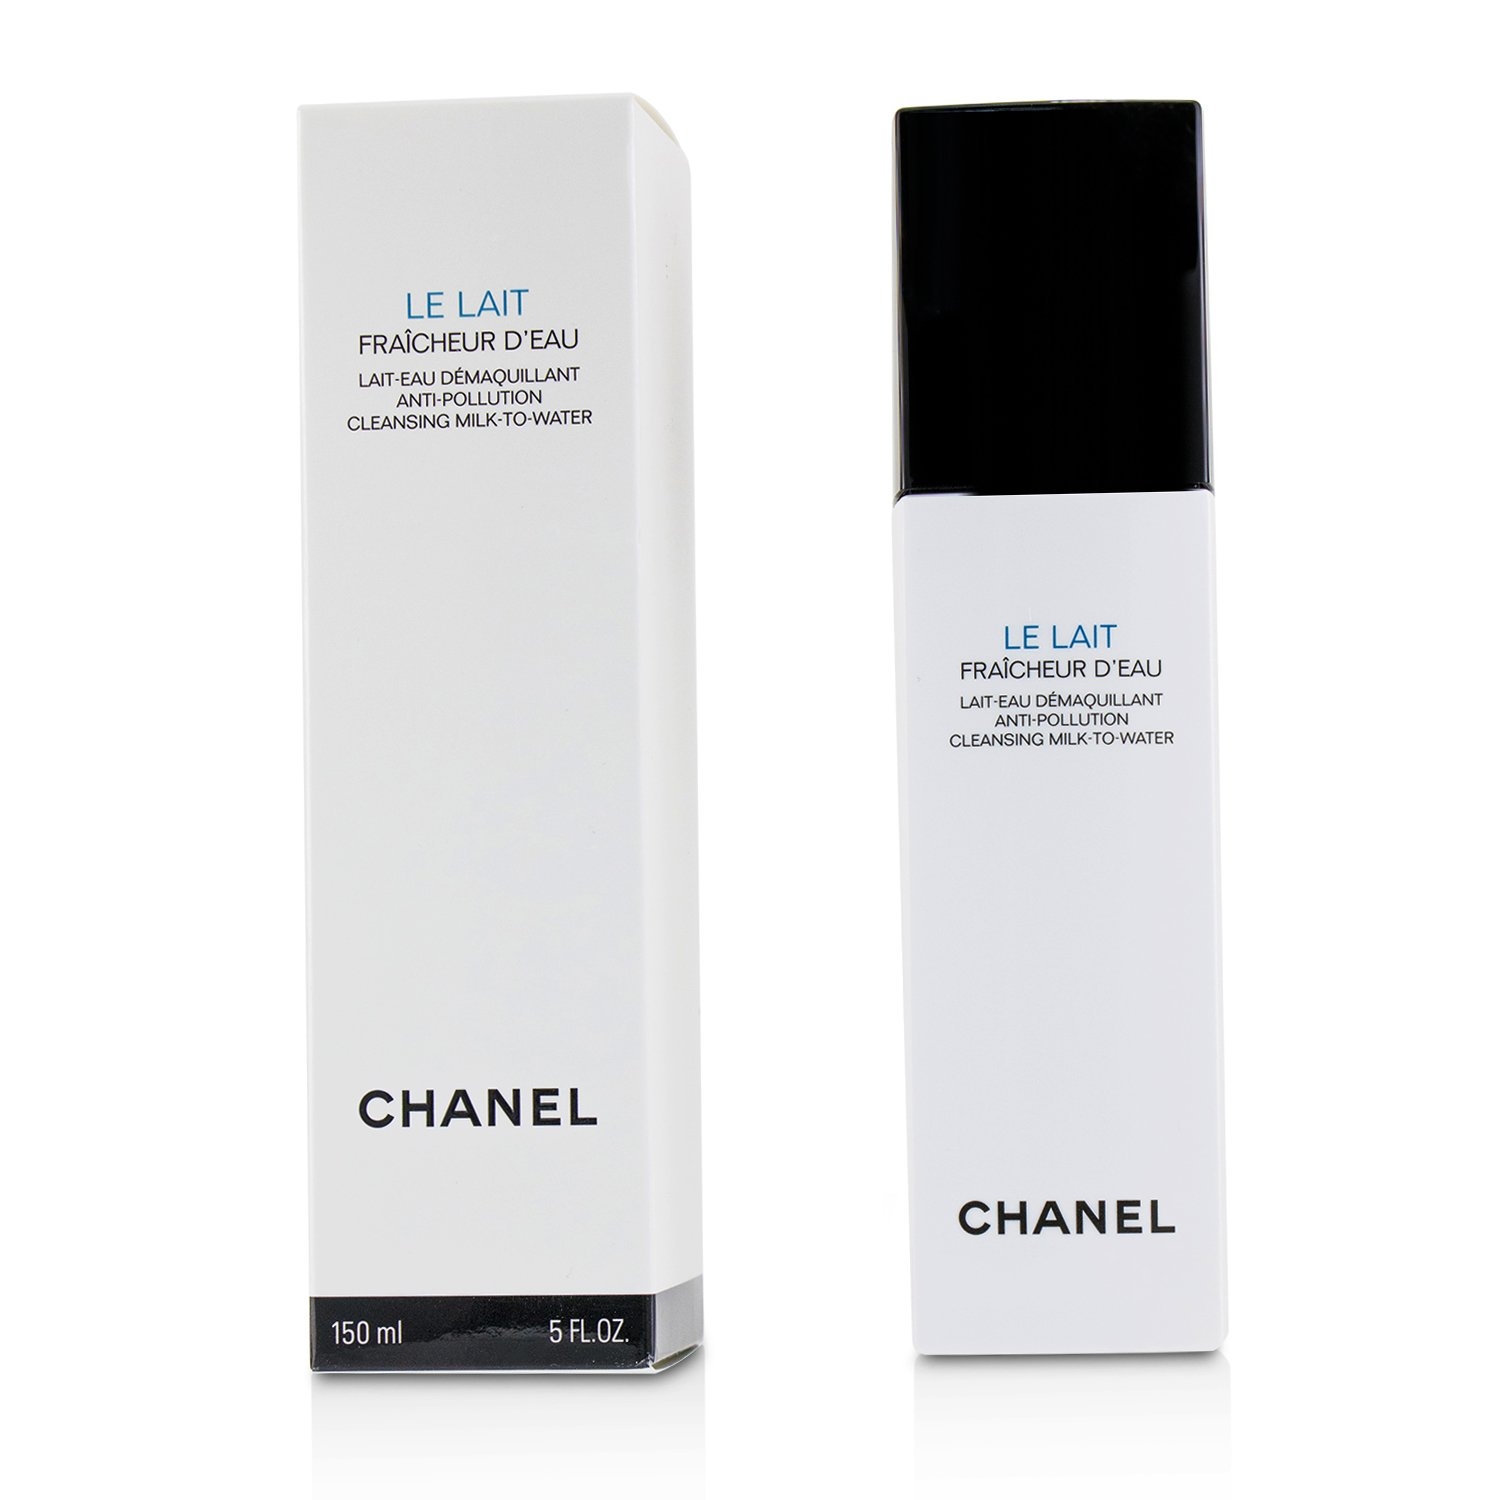 Chanel Hydra Beauty Micro Crème - Hydratant repulpant fortifiant